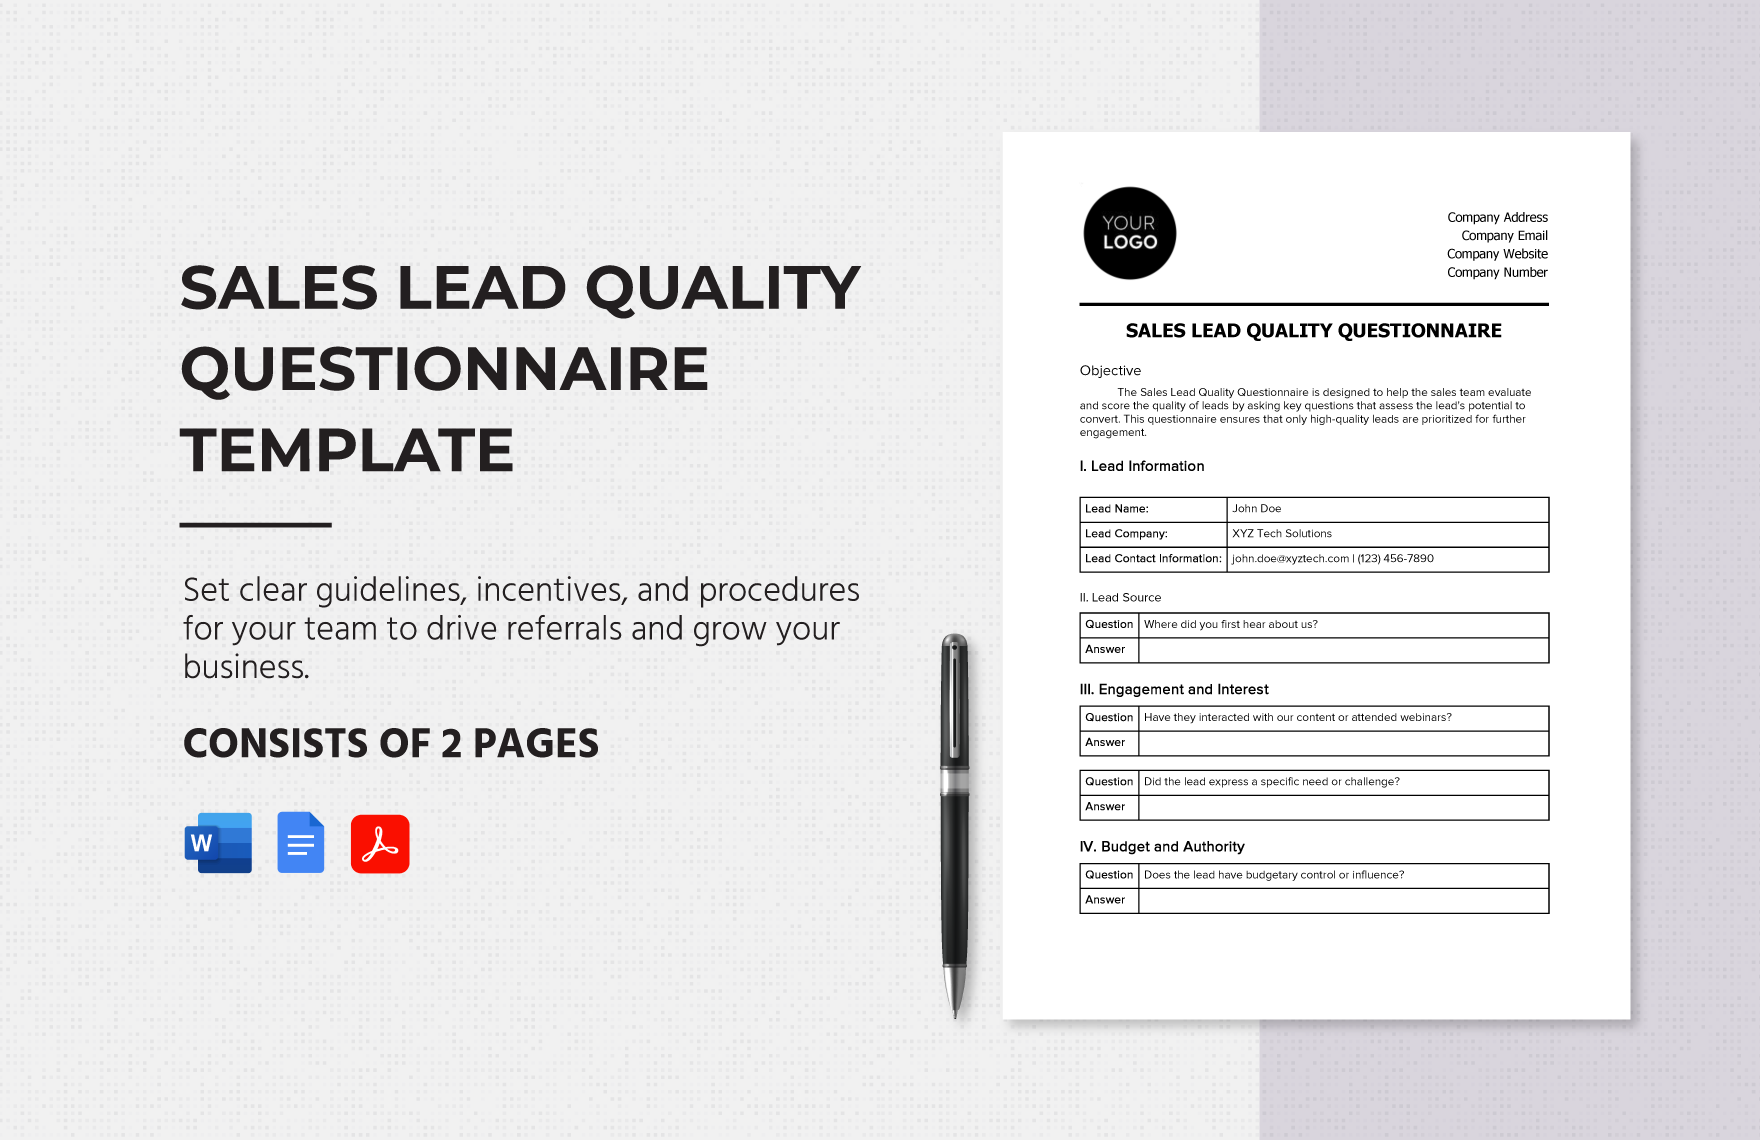 Sales Lead Quality Questionnaire Template in Word, Google Docs, PDF